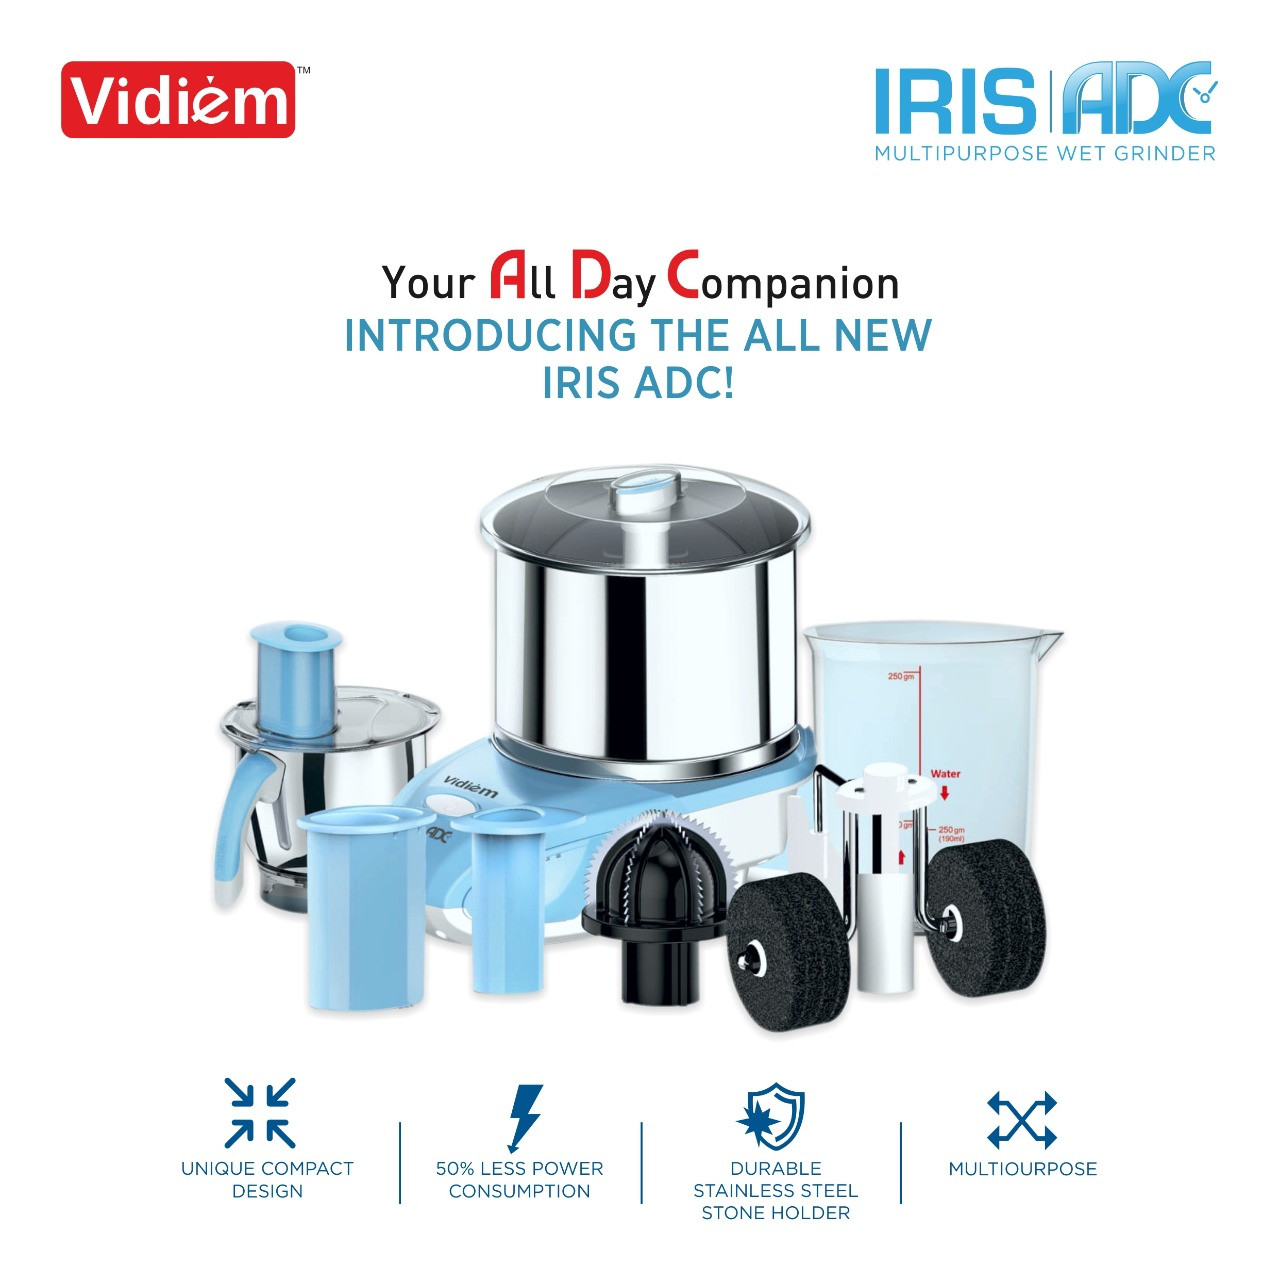 vidiem-iris-2l-multi-purpose-wet-grinder-ss-drum-stone-rollers-food-processor-multi-chef-jar-atta-kneader-110v90w-for-usa-canada-motor-rpm-1440-and-drum-rpm-150-home-commercial-use